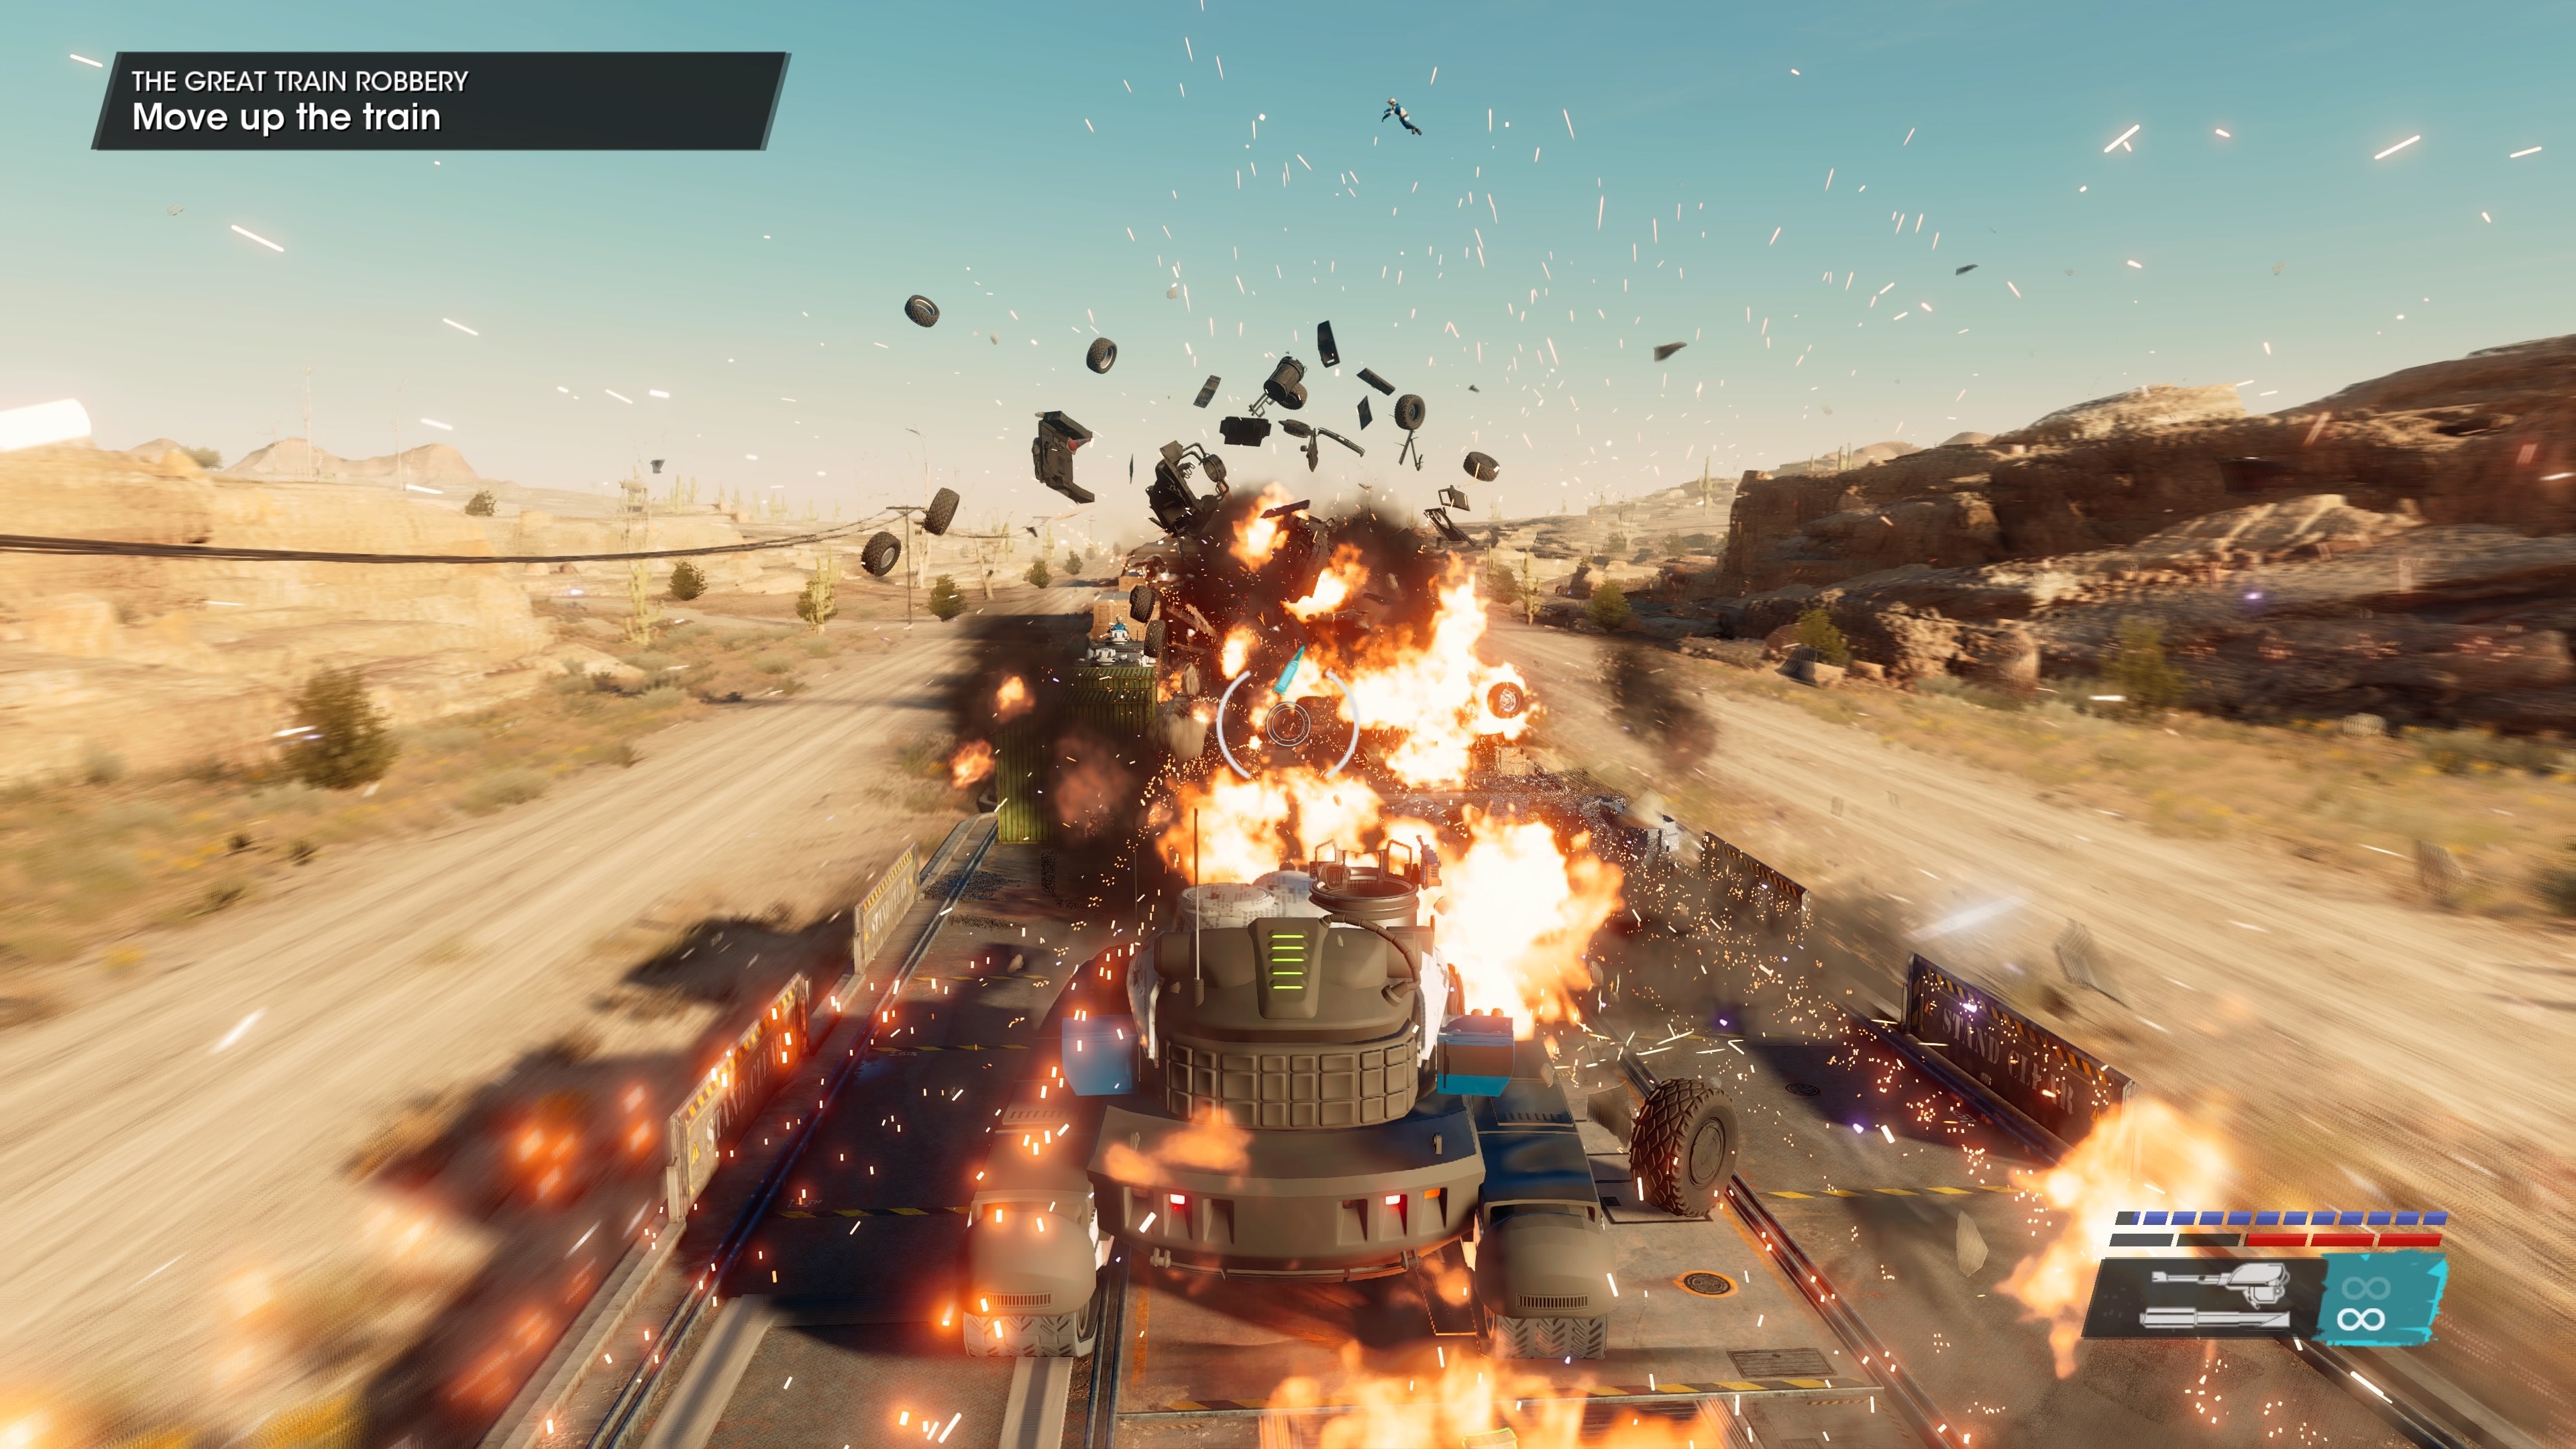 Saints Row review - a massive and impressive explosion of traffic on a desert road